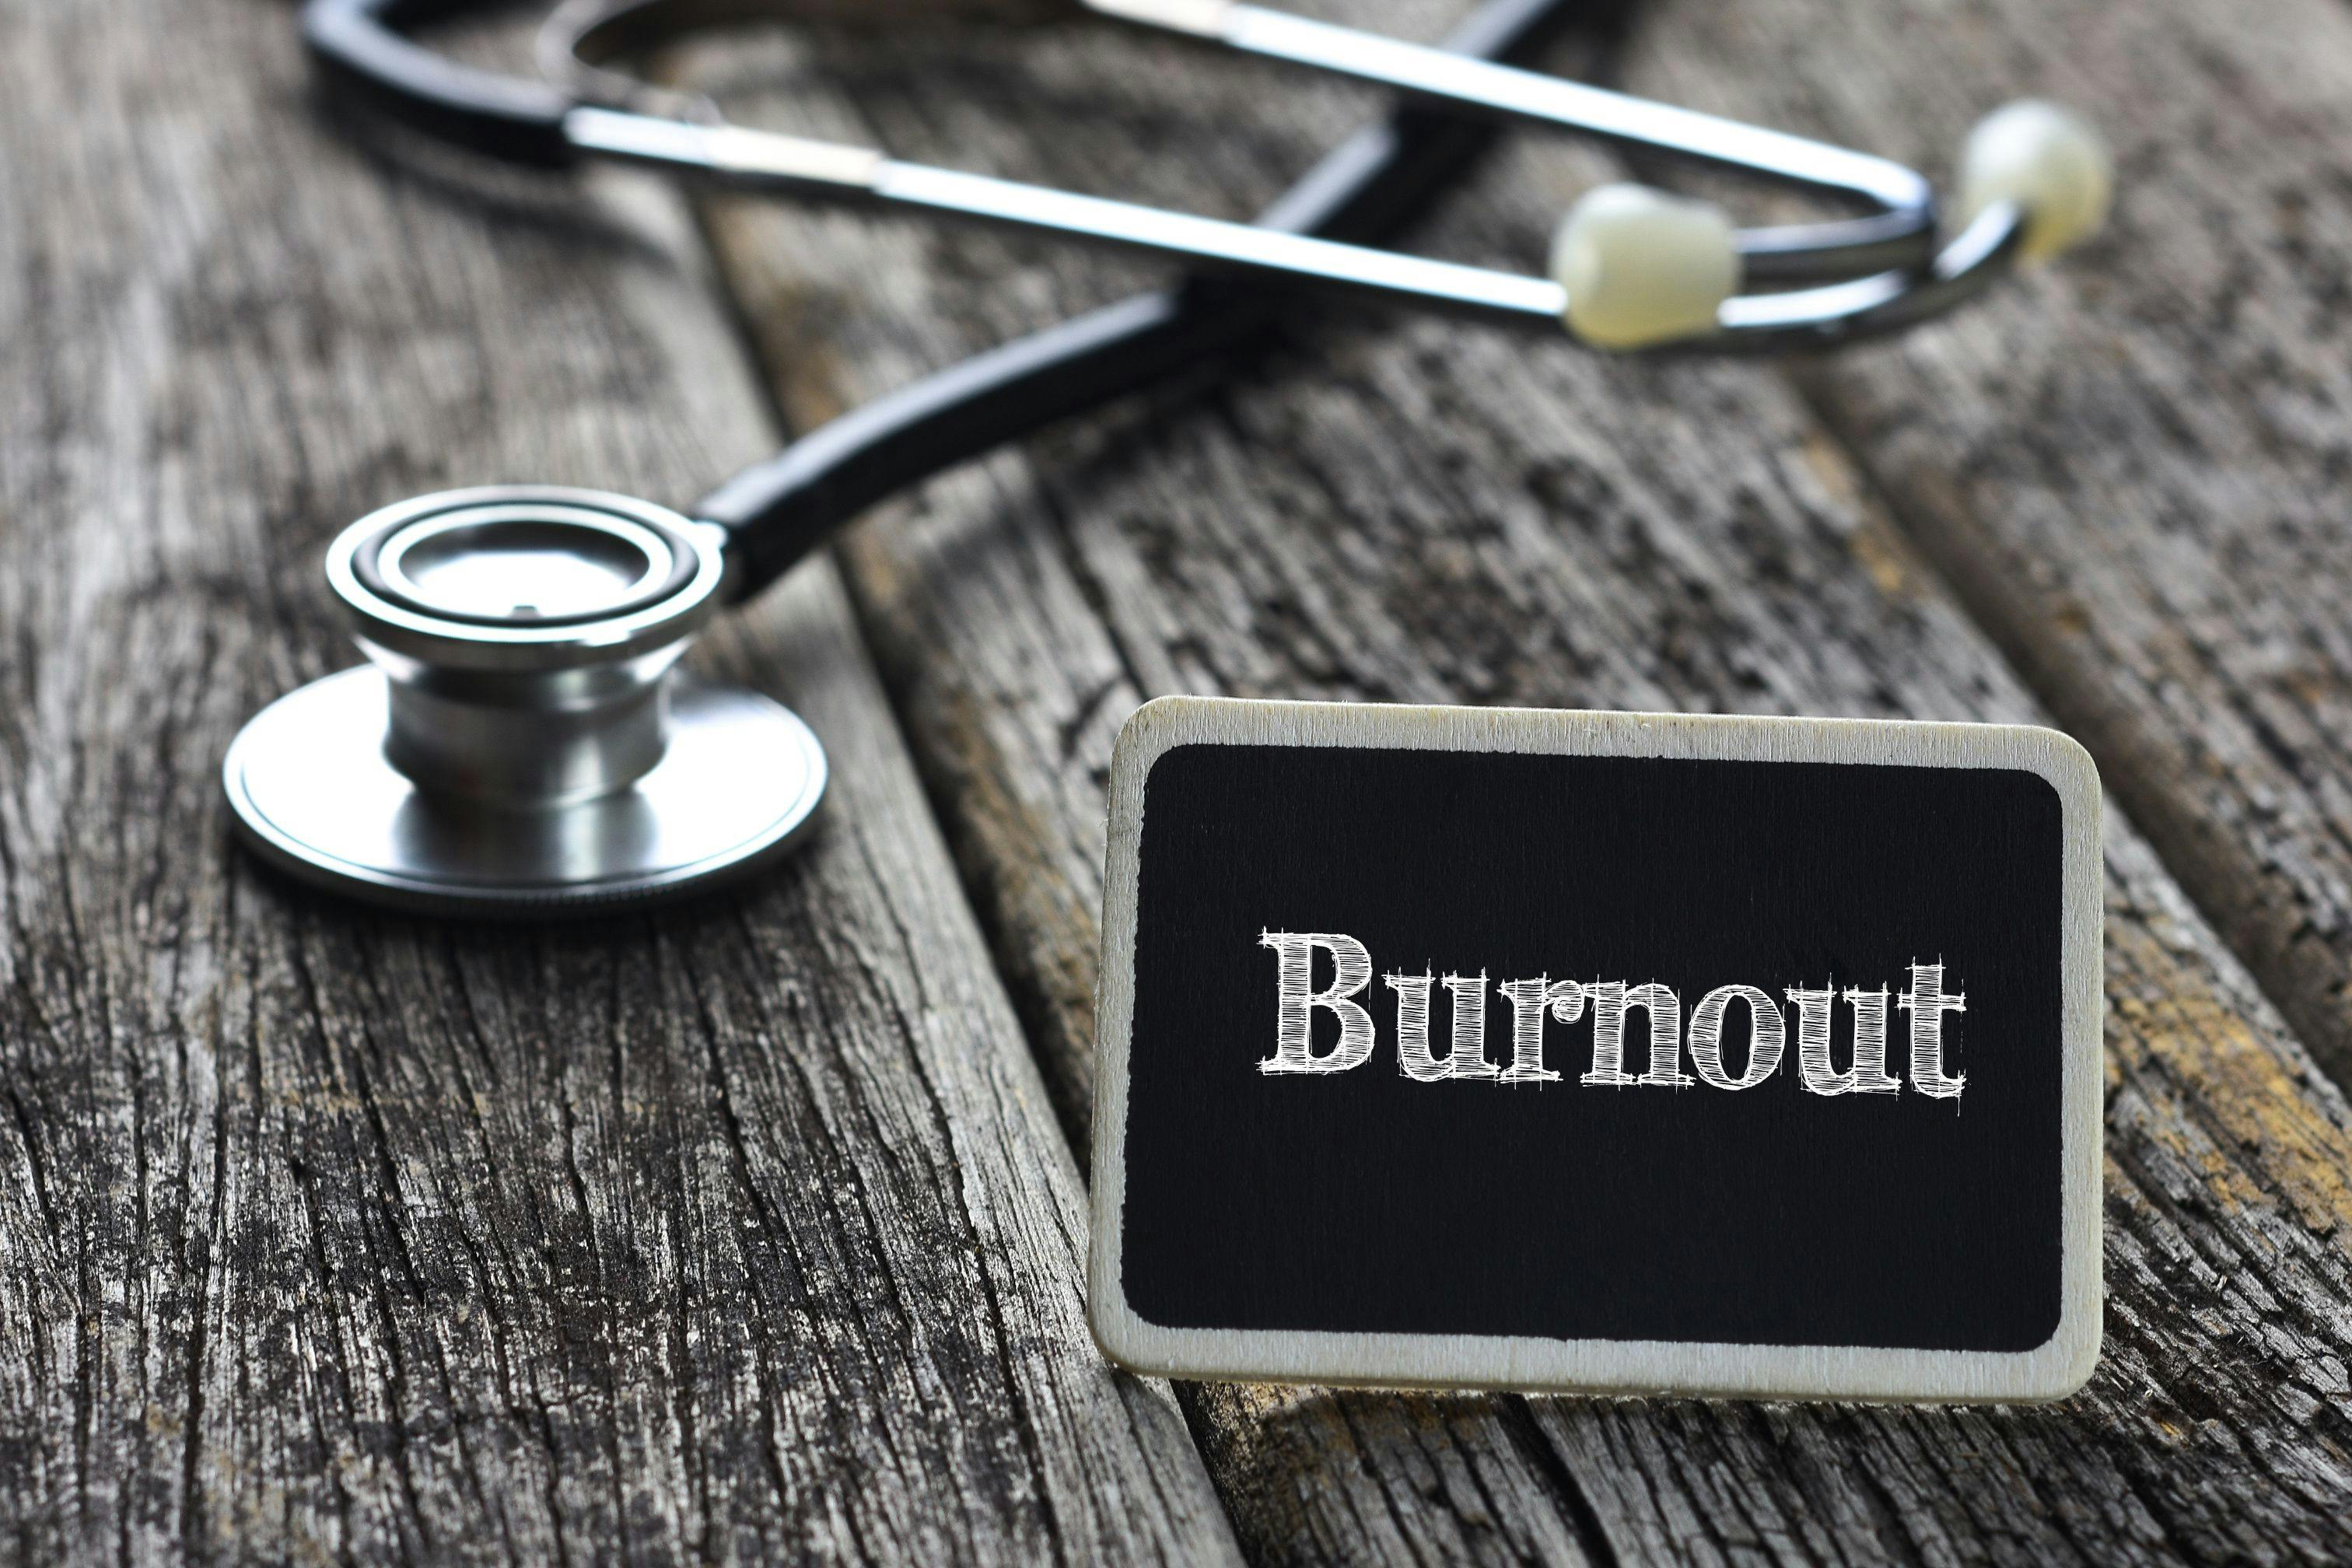 Technology can mitigate physician burnout